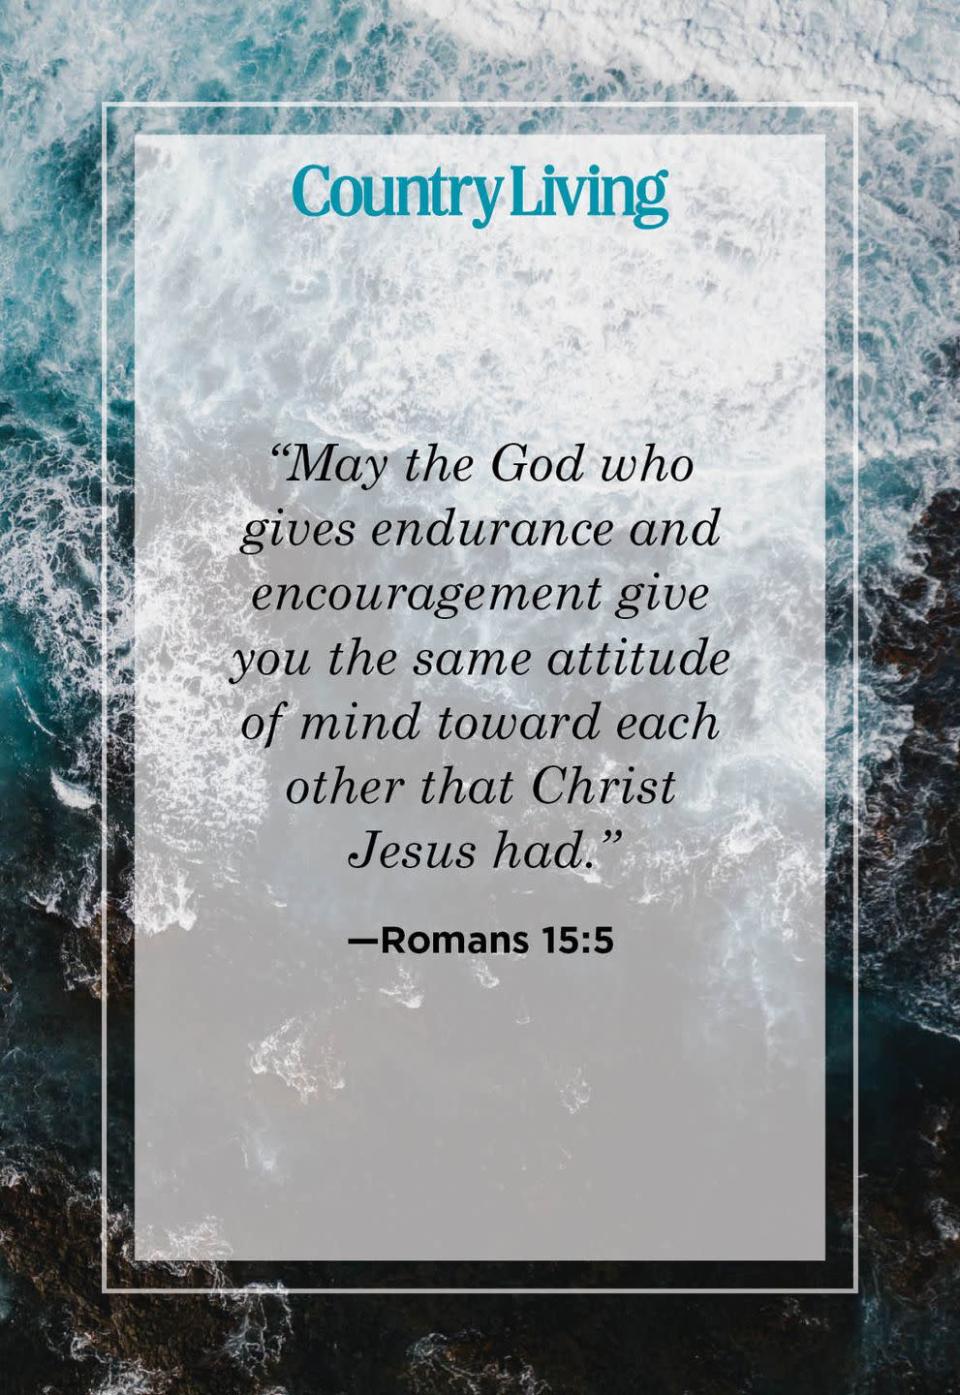 <p>“May the God who gives endurance and encouragement give you the same attitude of mind toward each other that Christ Jesus had.” </p>